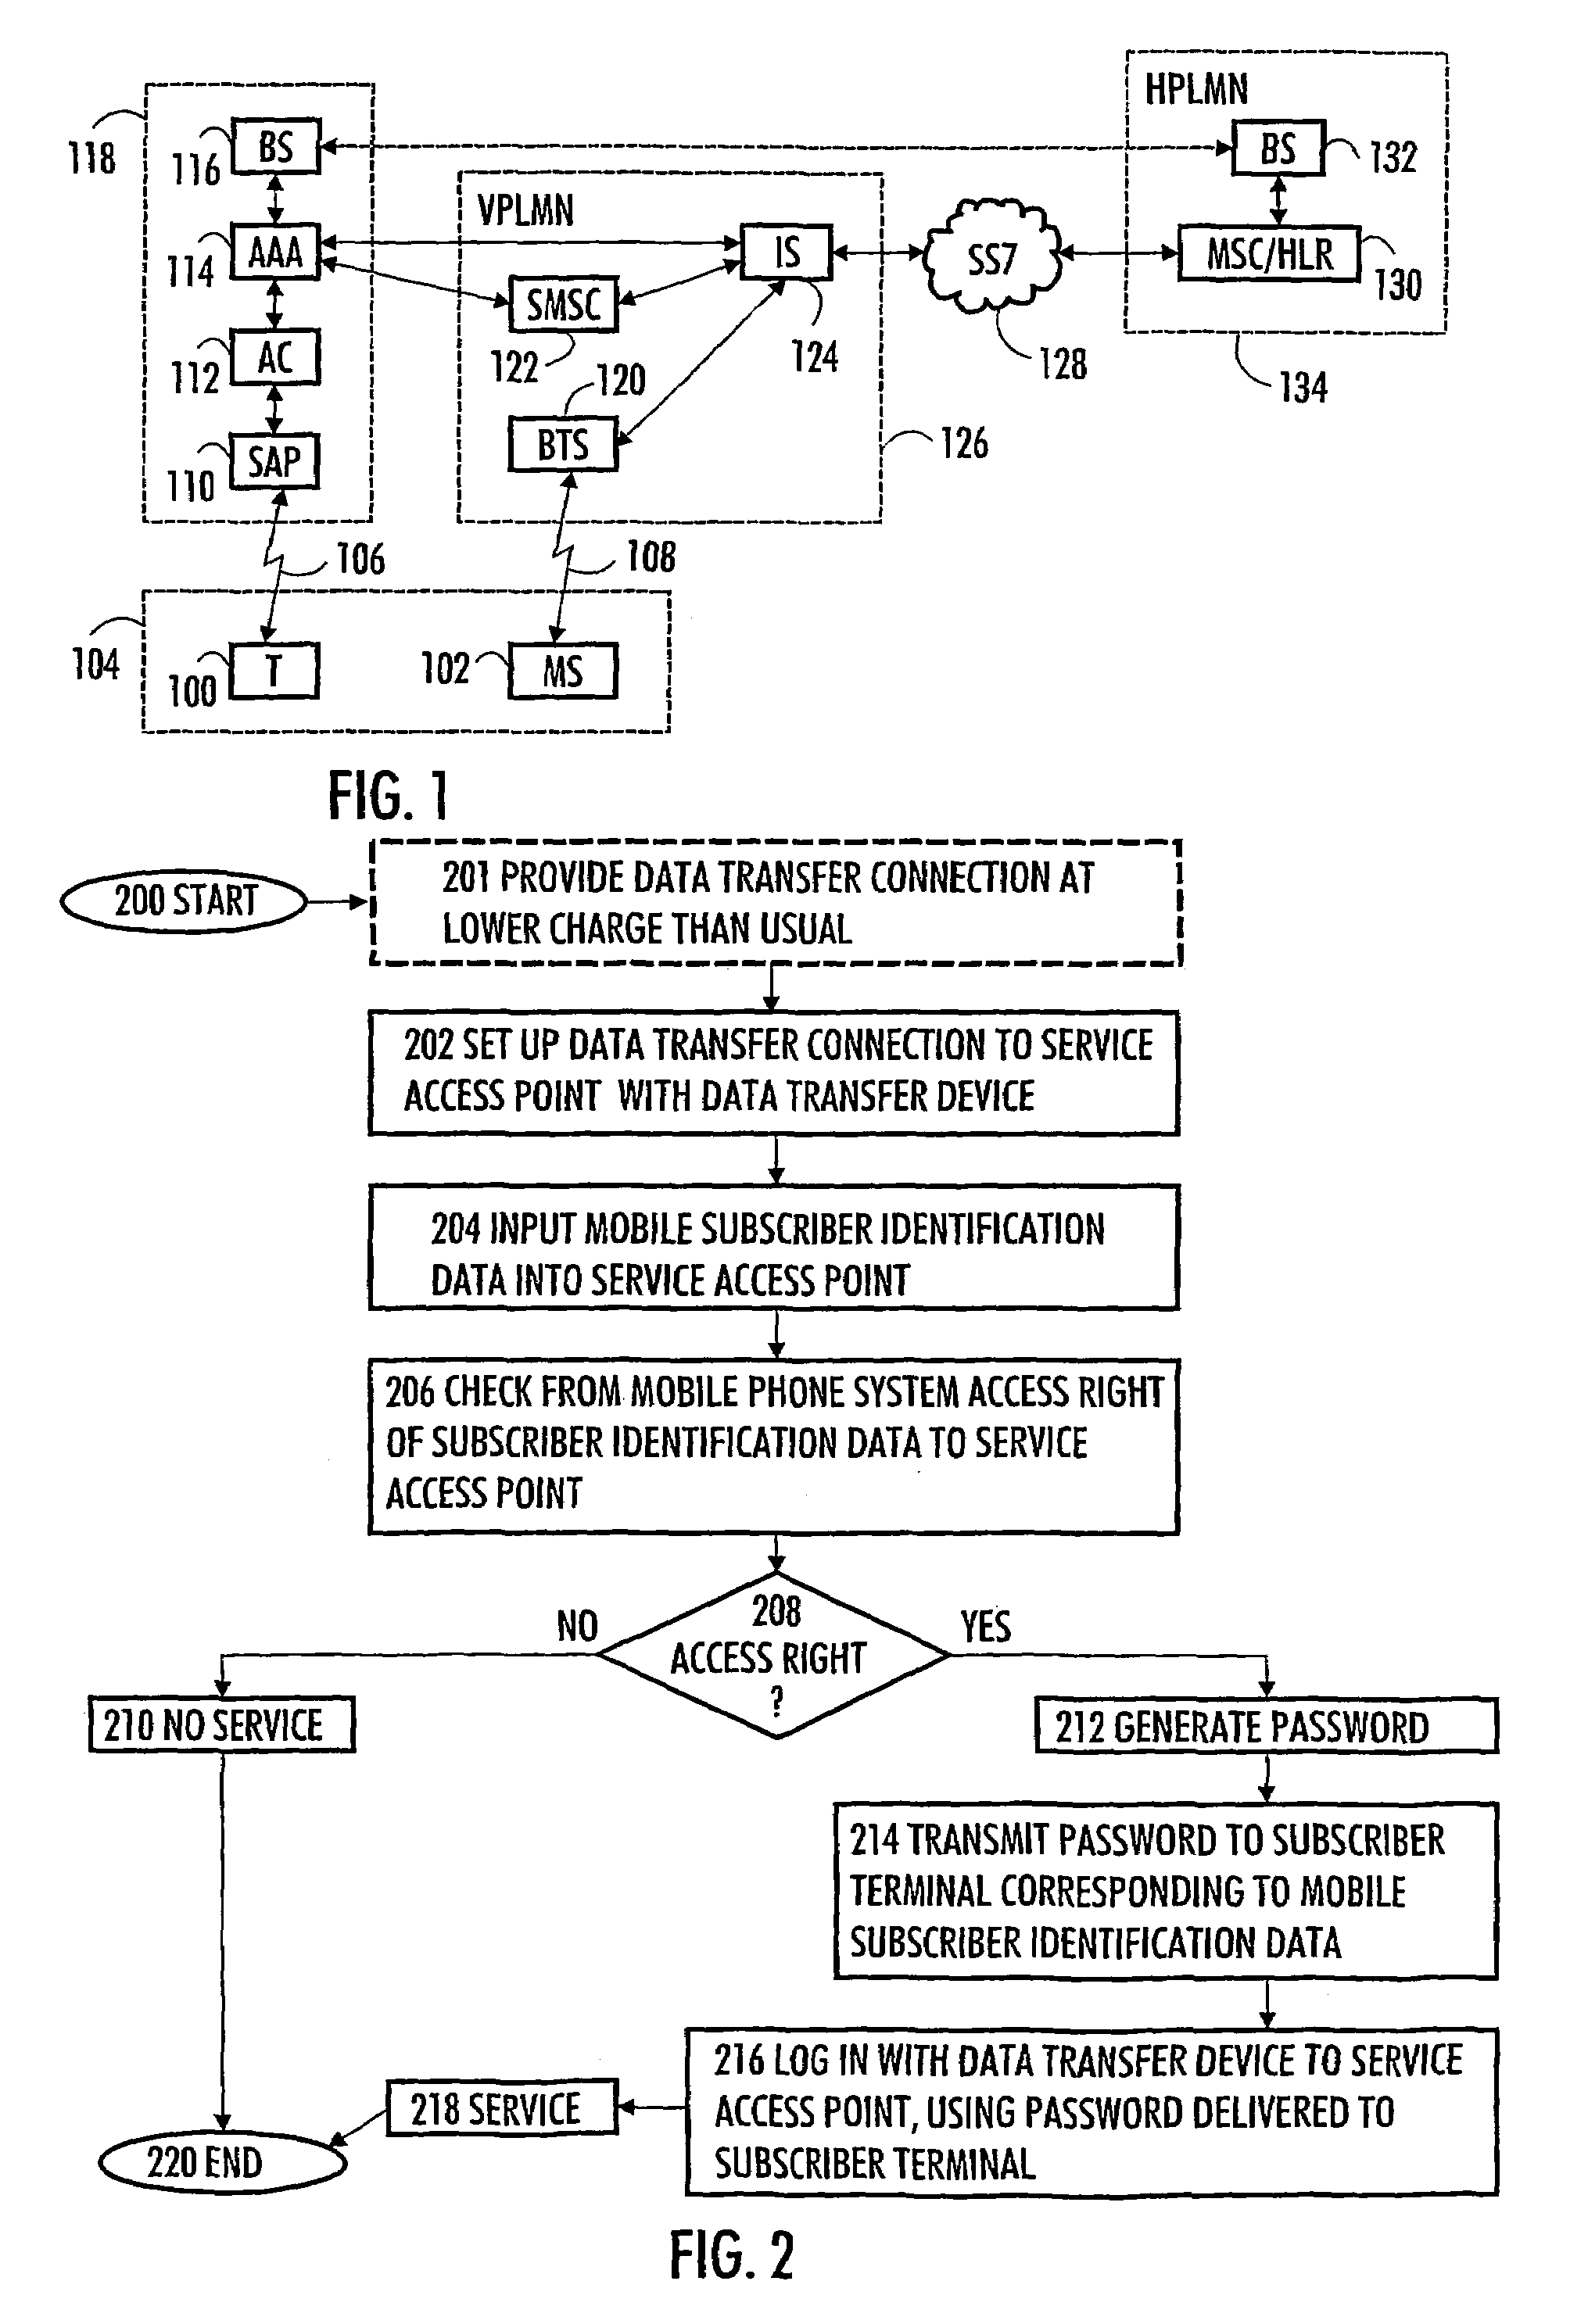 Method and system for authenticating user of data transfer device